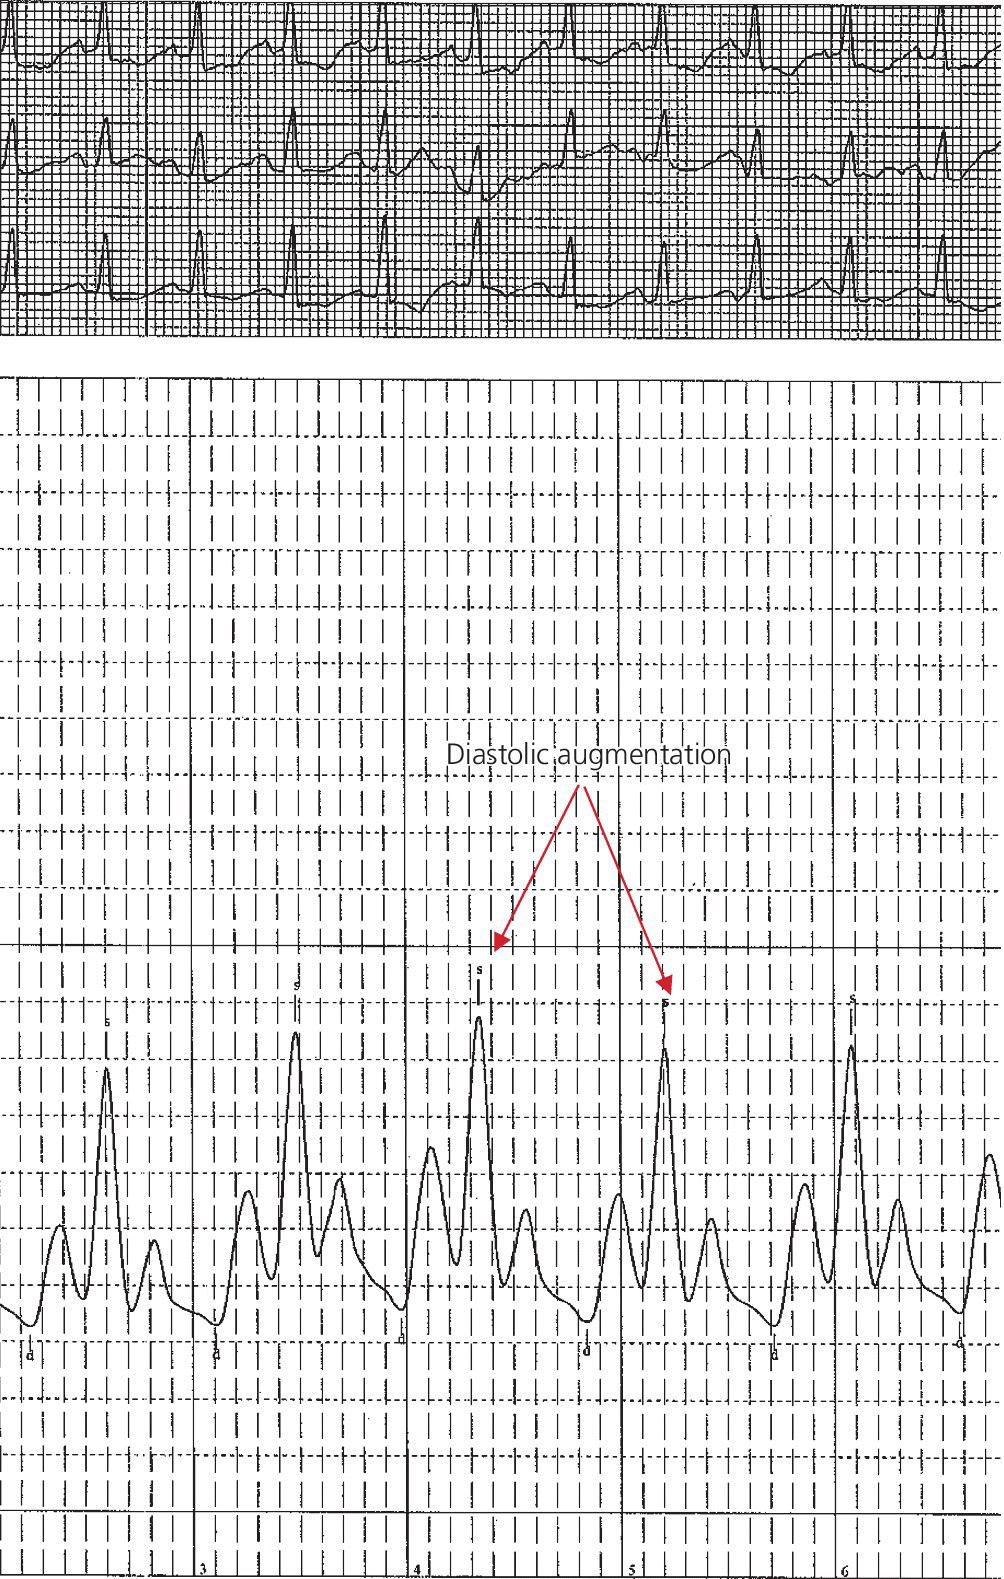 2 Electrocardiograms illustrating the IABP set on a 1:2 ratio in a 60-year-old male with cardiogenic shock in the setting of acute myocardial infarction (200 mm Hg scale).